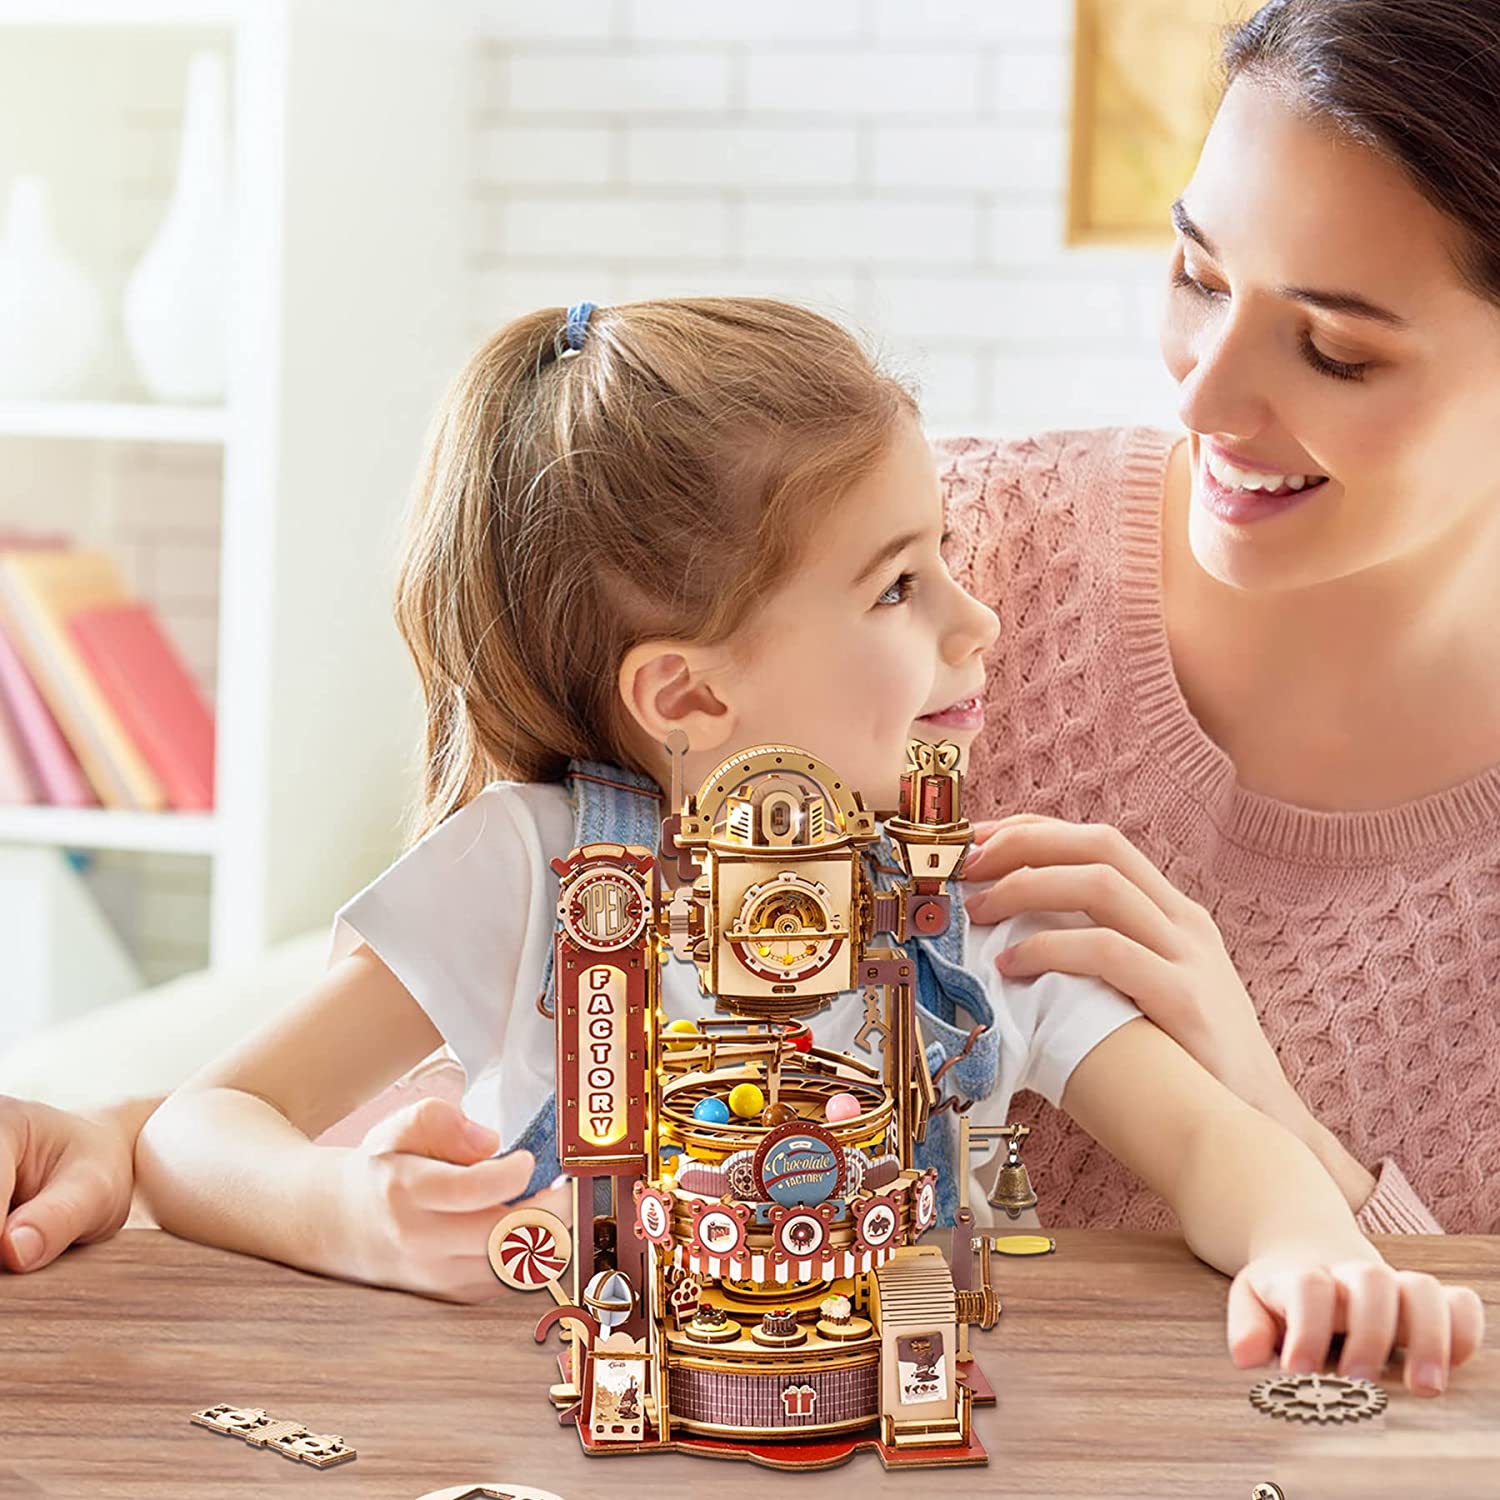 Robotime ROKR Marble Chocolate Factory 3D Wooden Puzzle Games Assembly Model Building Toys For Children Kids Birthday Gift - TryKid